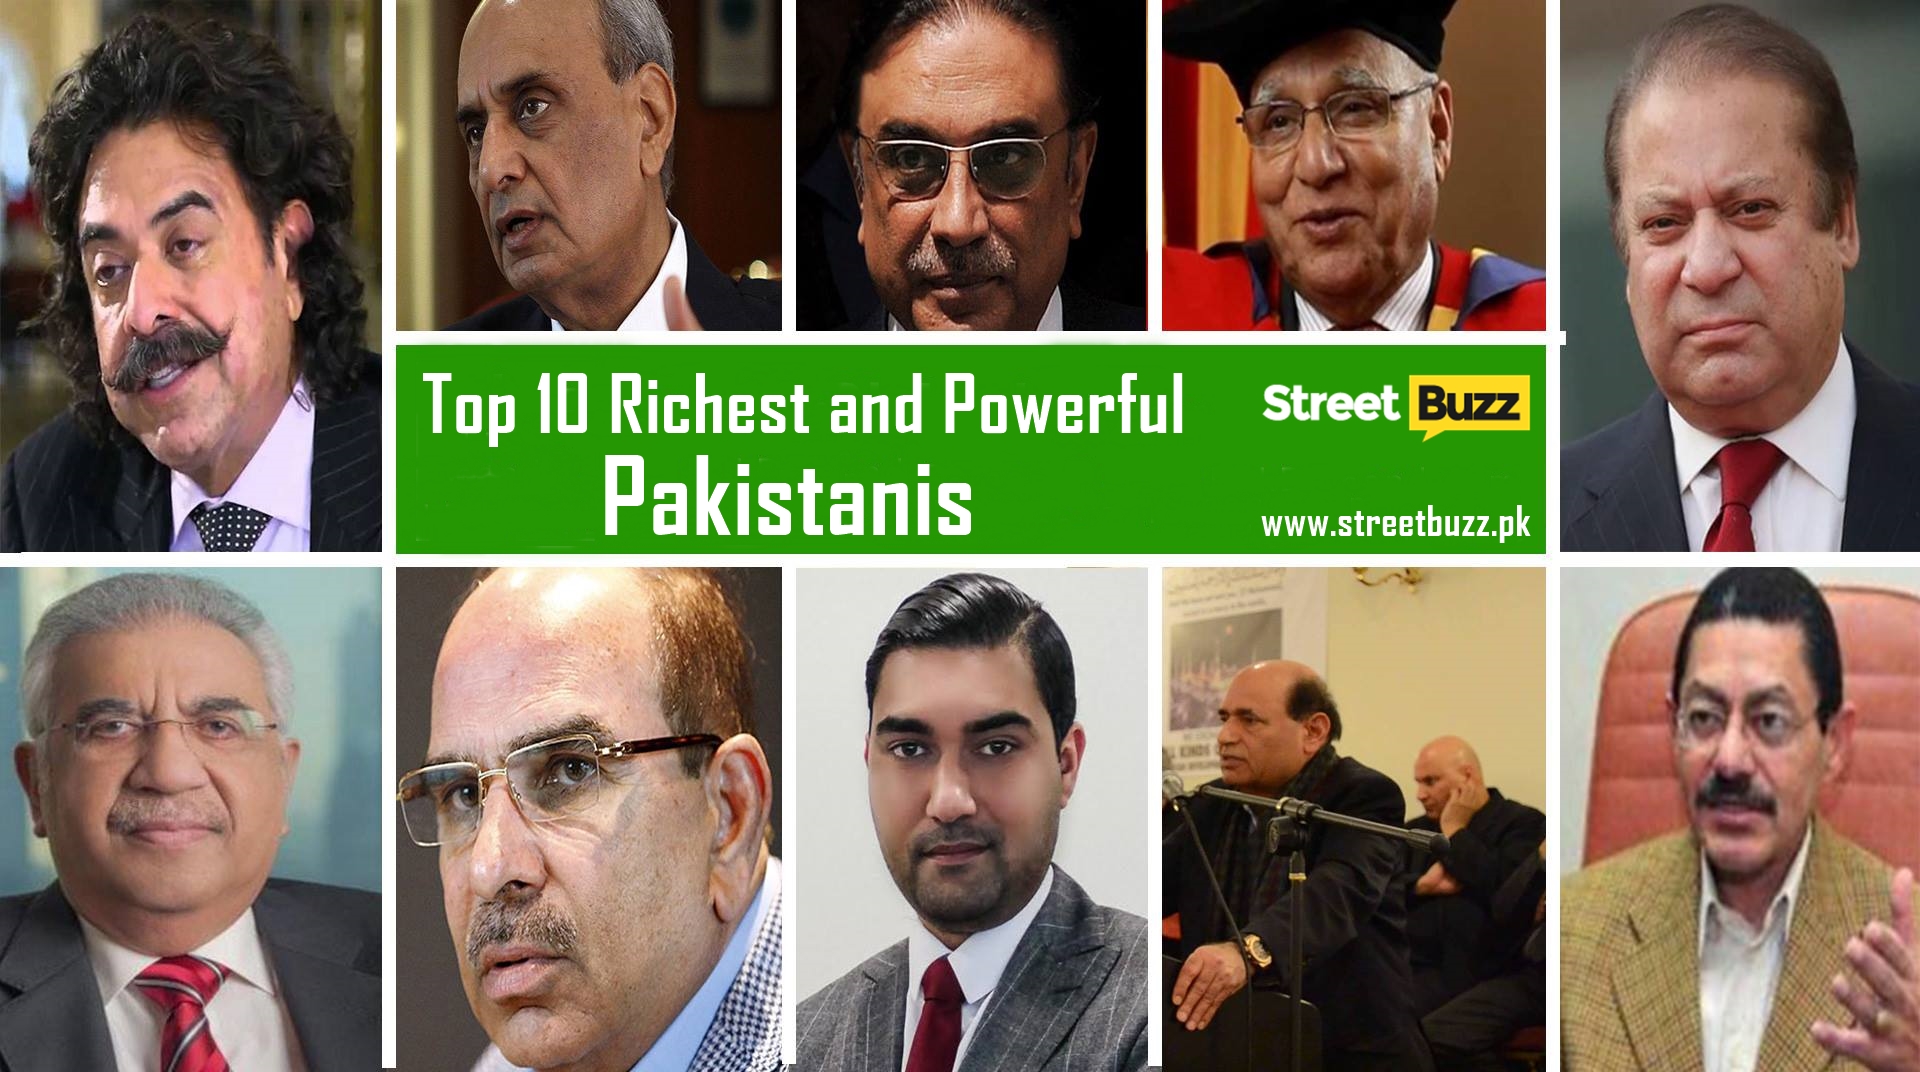 Top 10 Richest and Powerful Pakistanis